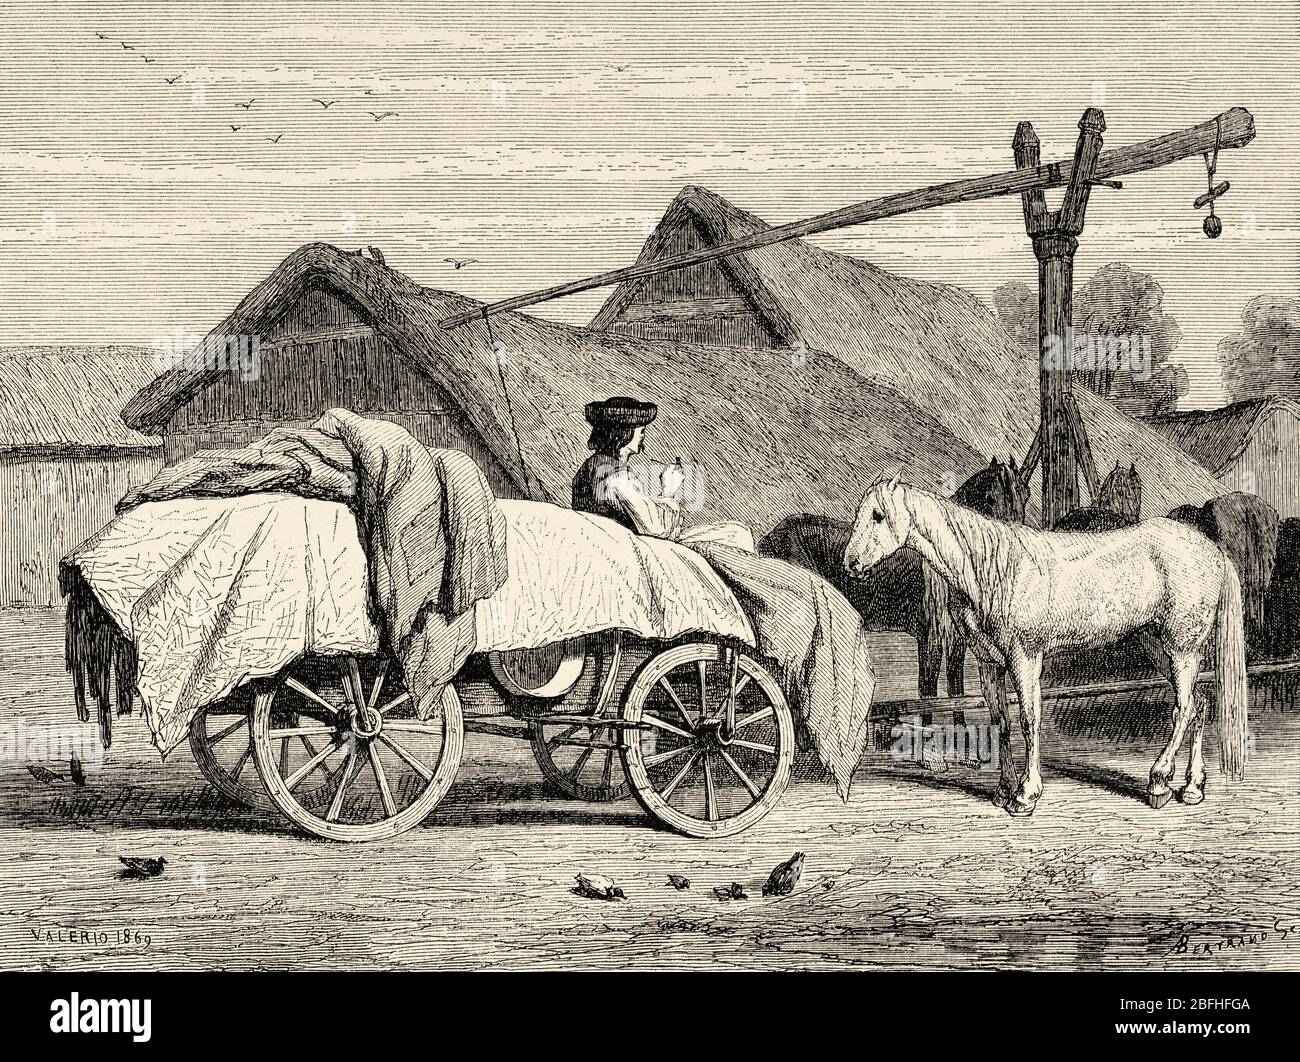 Cart and animals on a farm, great Hungarian plain, Hungary. Europe, Old engraving illustration Trip land of southern Slavs by M. Perrot Stock Photo